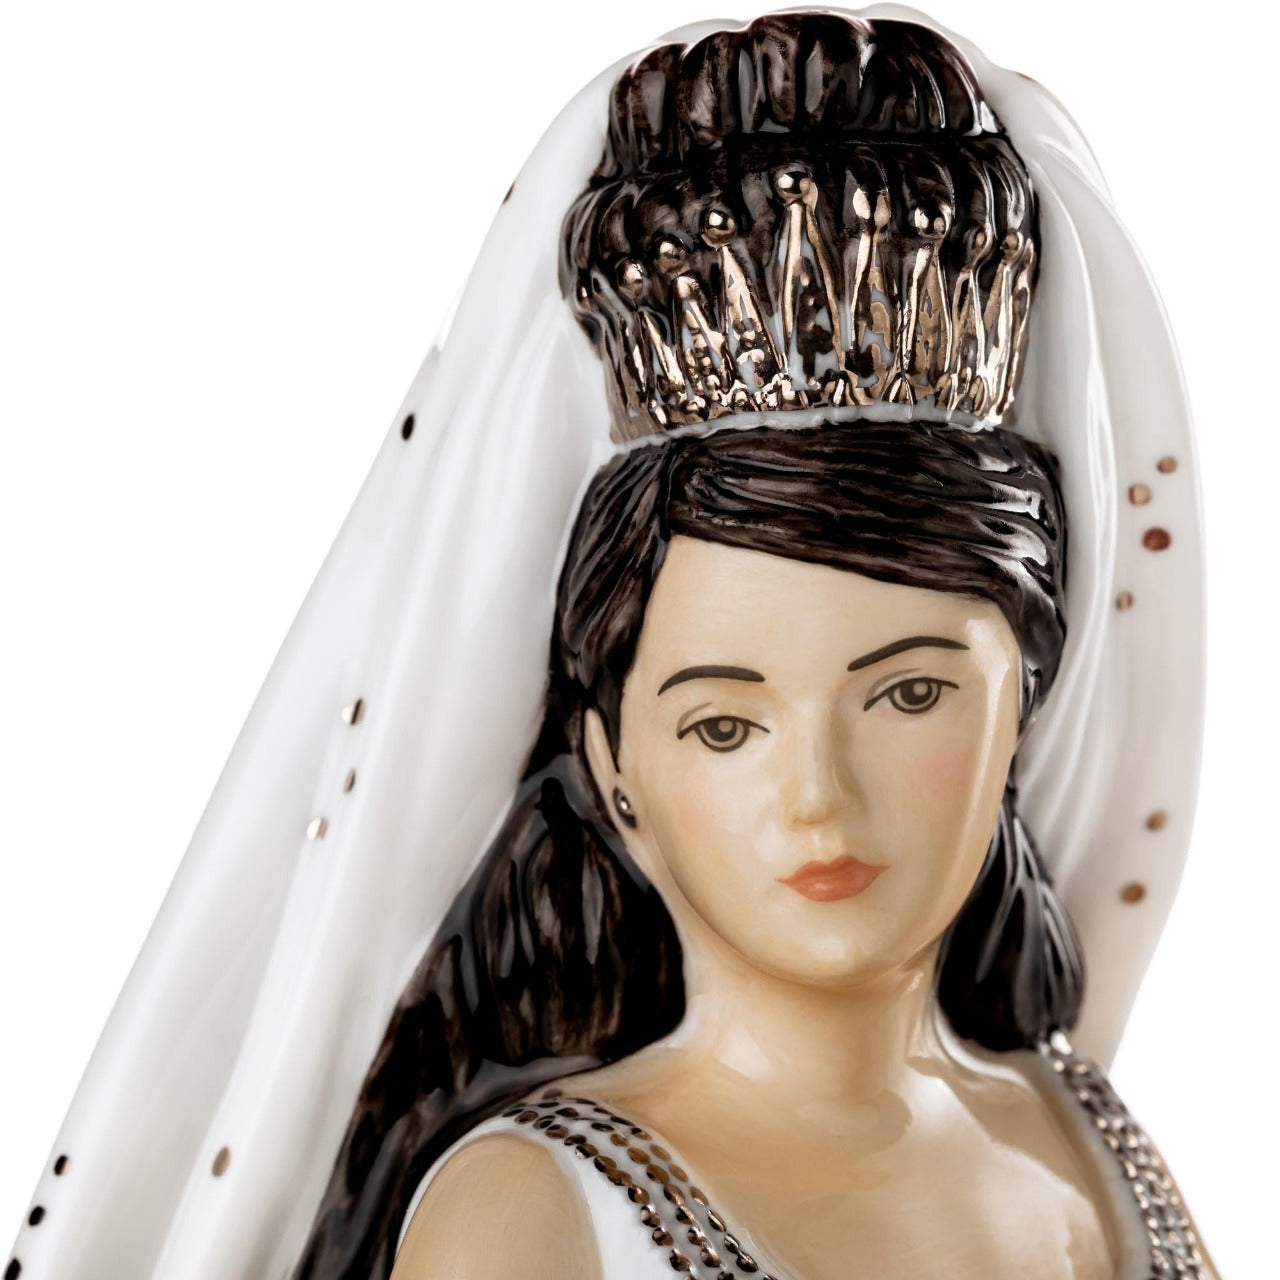 English Ladies Gypsy Affection Brunette  Gypsy Affection figurines are the latest to join the Thelma Madine range here at the English Ladies Co. This figurine is inspired by the stunning work of Thelma Madine and brings to life the style of her dresses in figurine form.